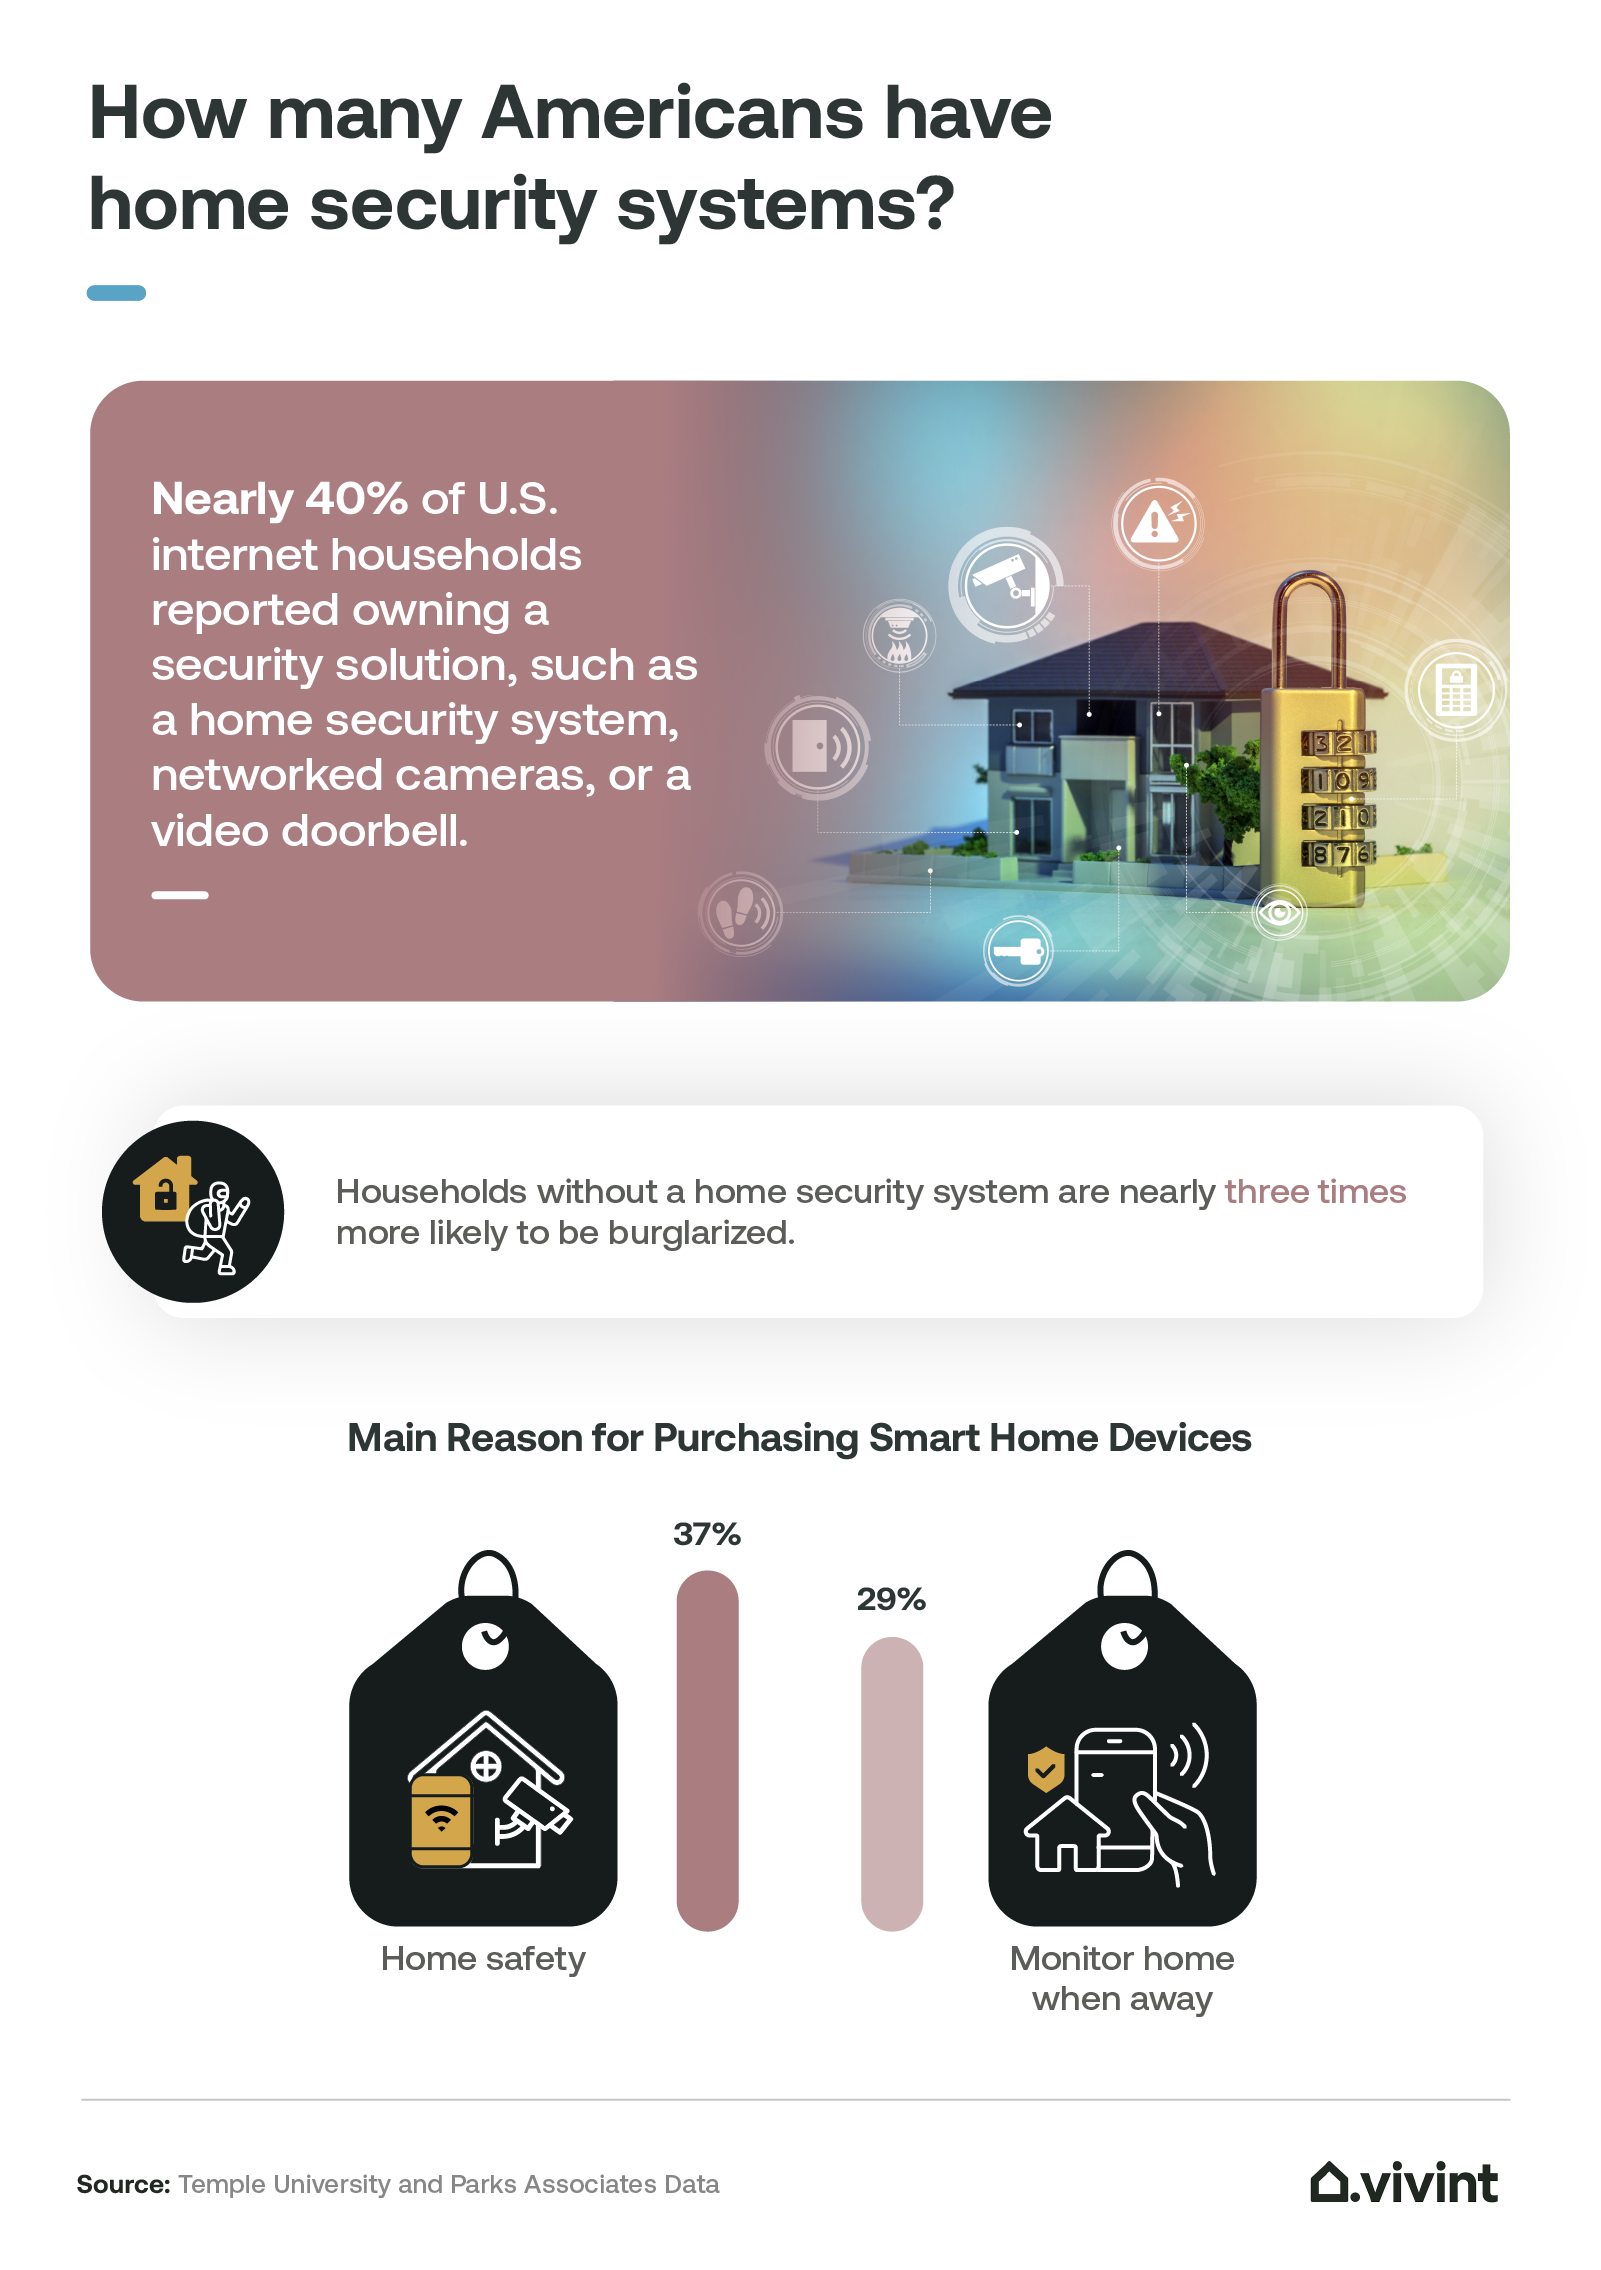 Information about how many Americans have home security systems.